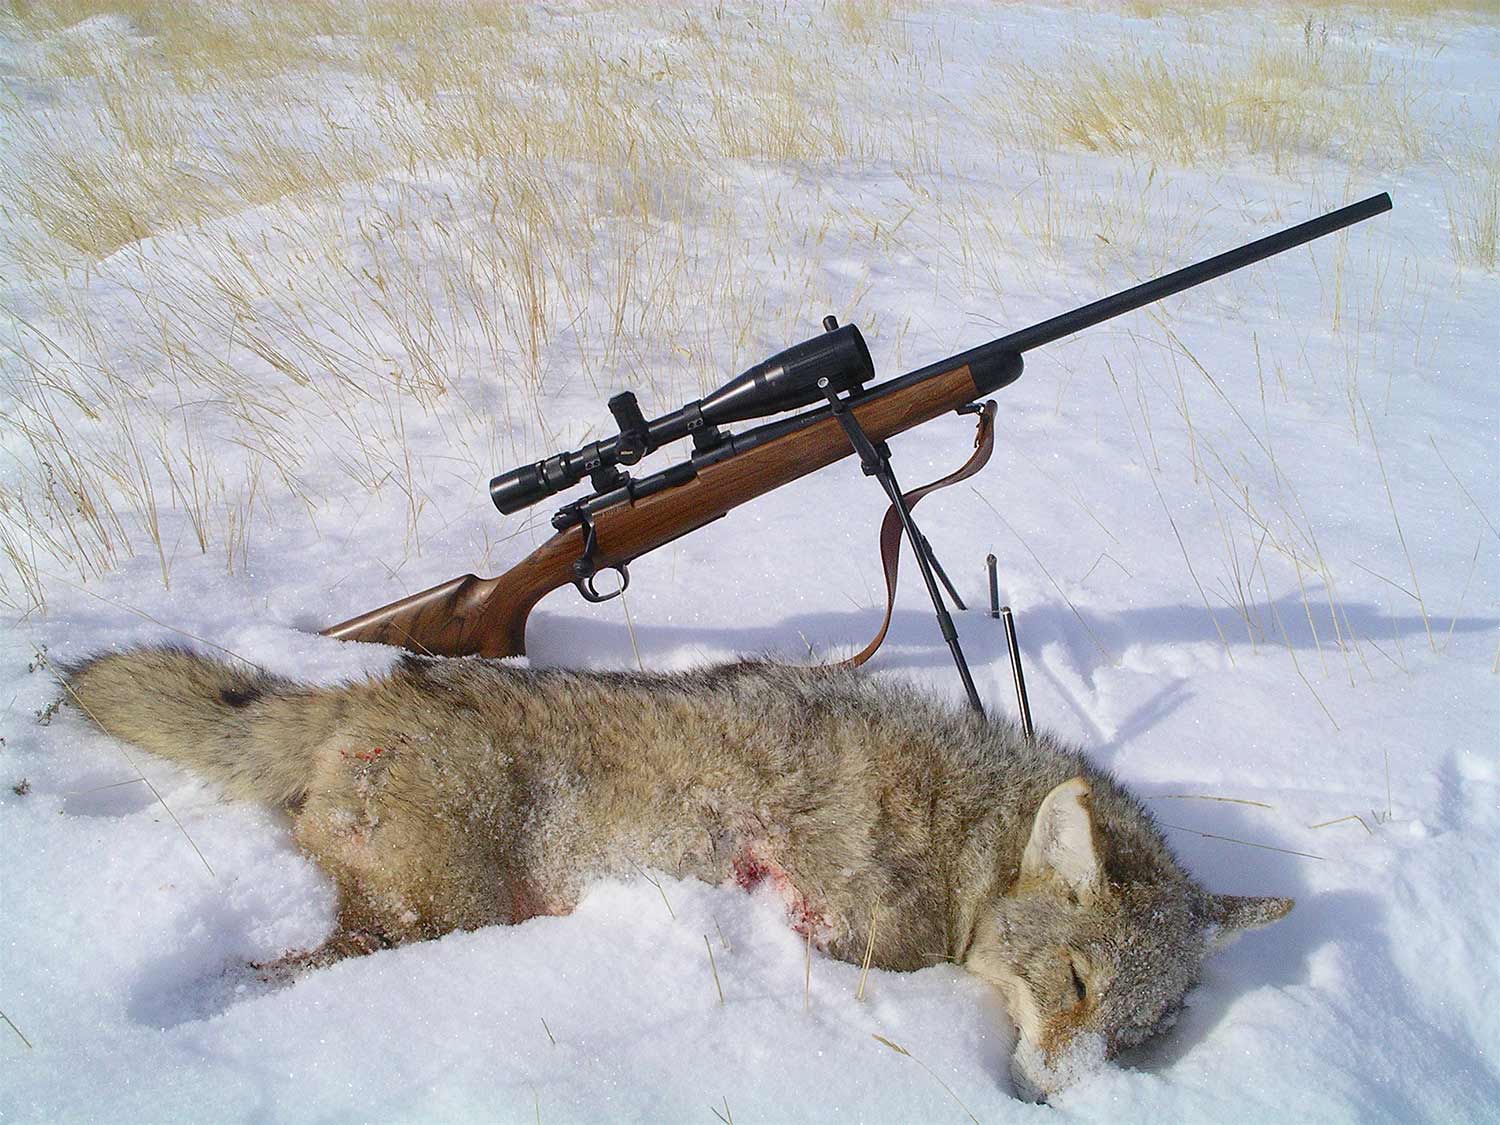 coyote in the snow next to a rifle.